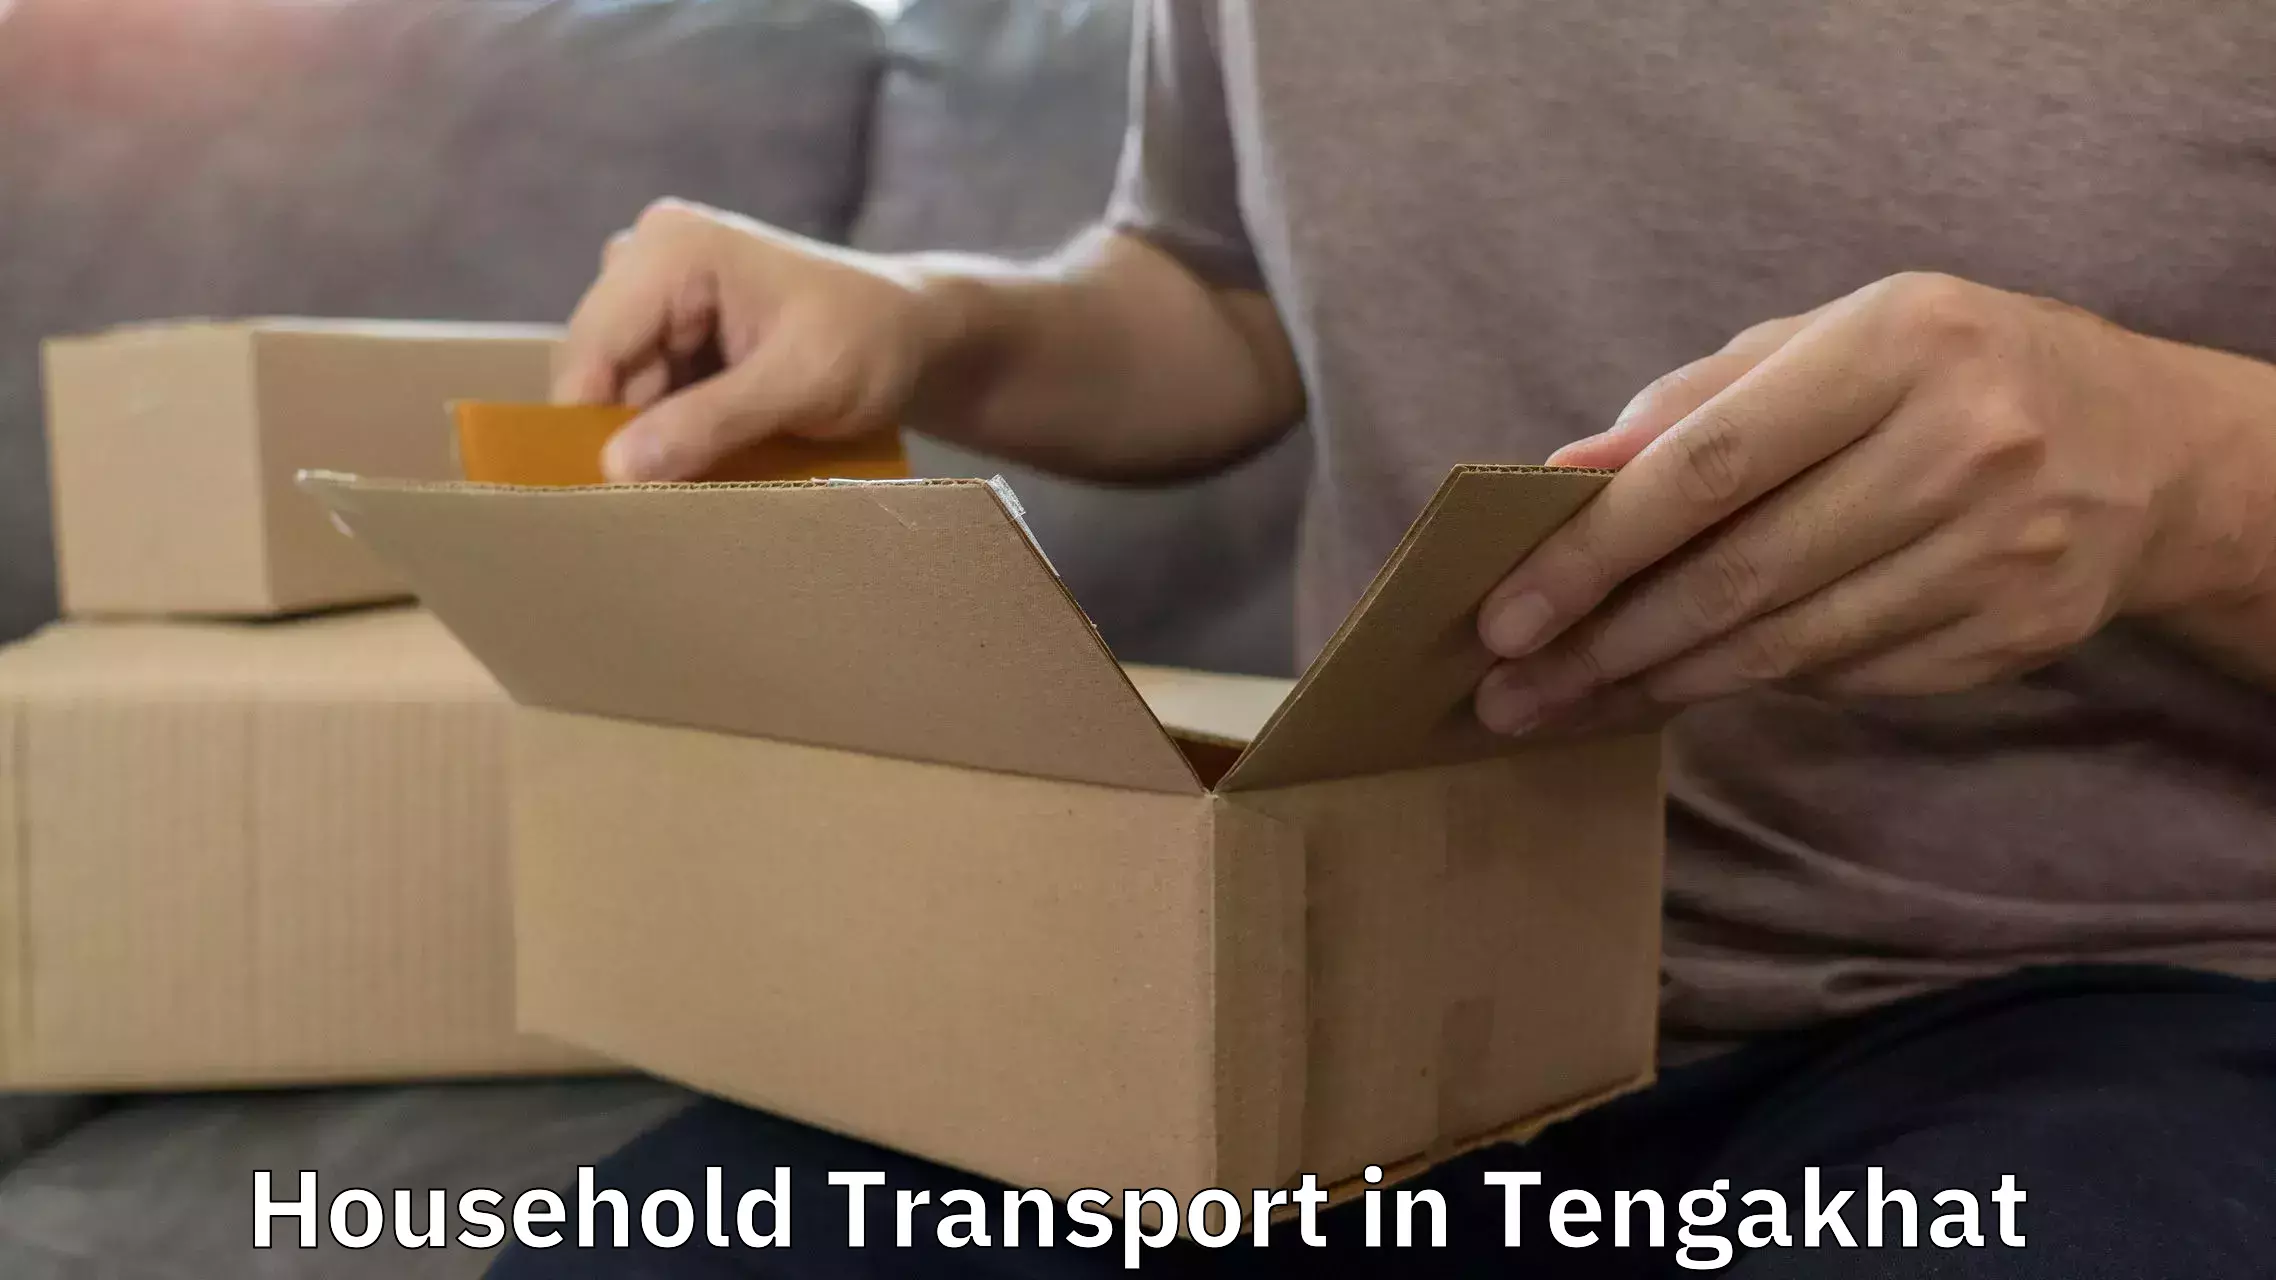 Professional packing and transport in Tengakhat